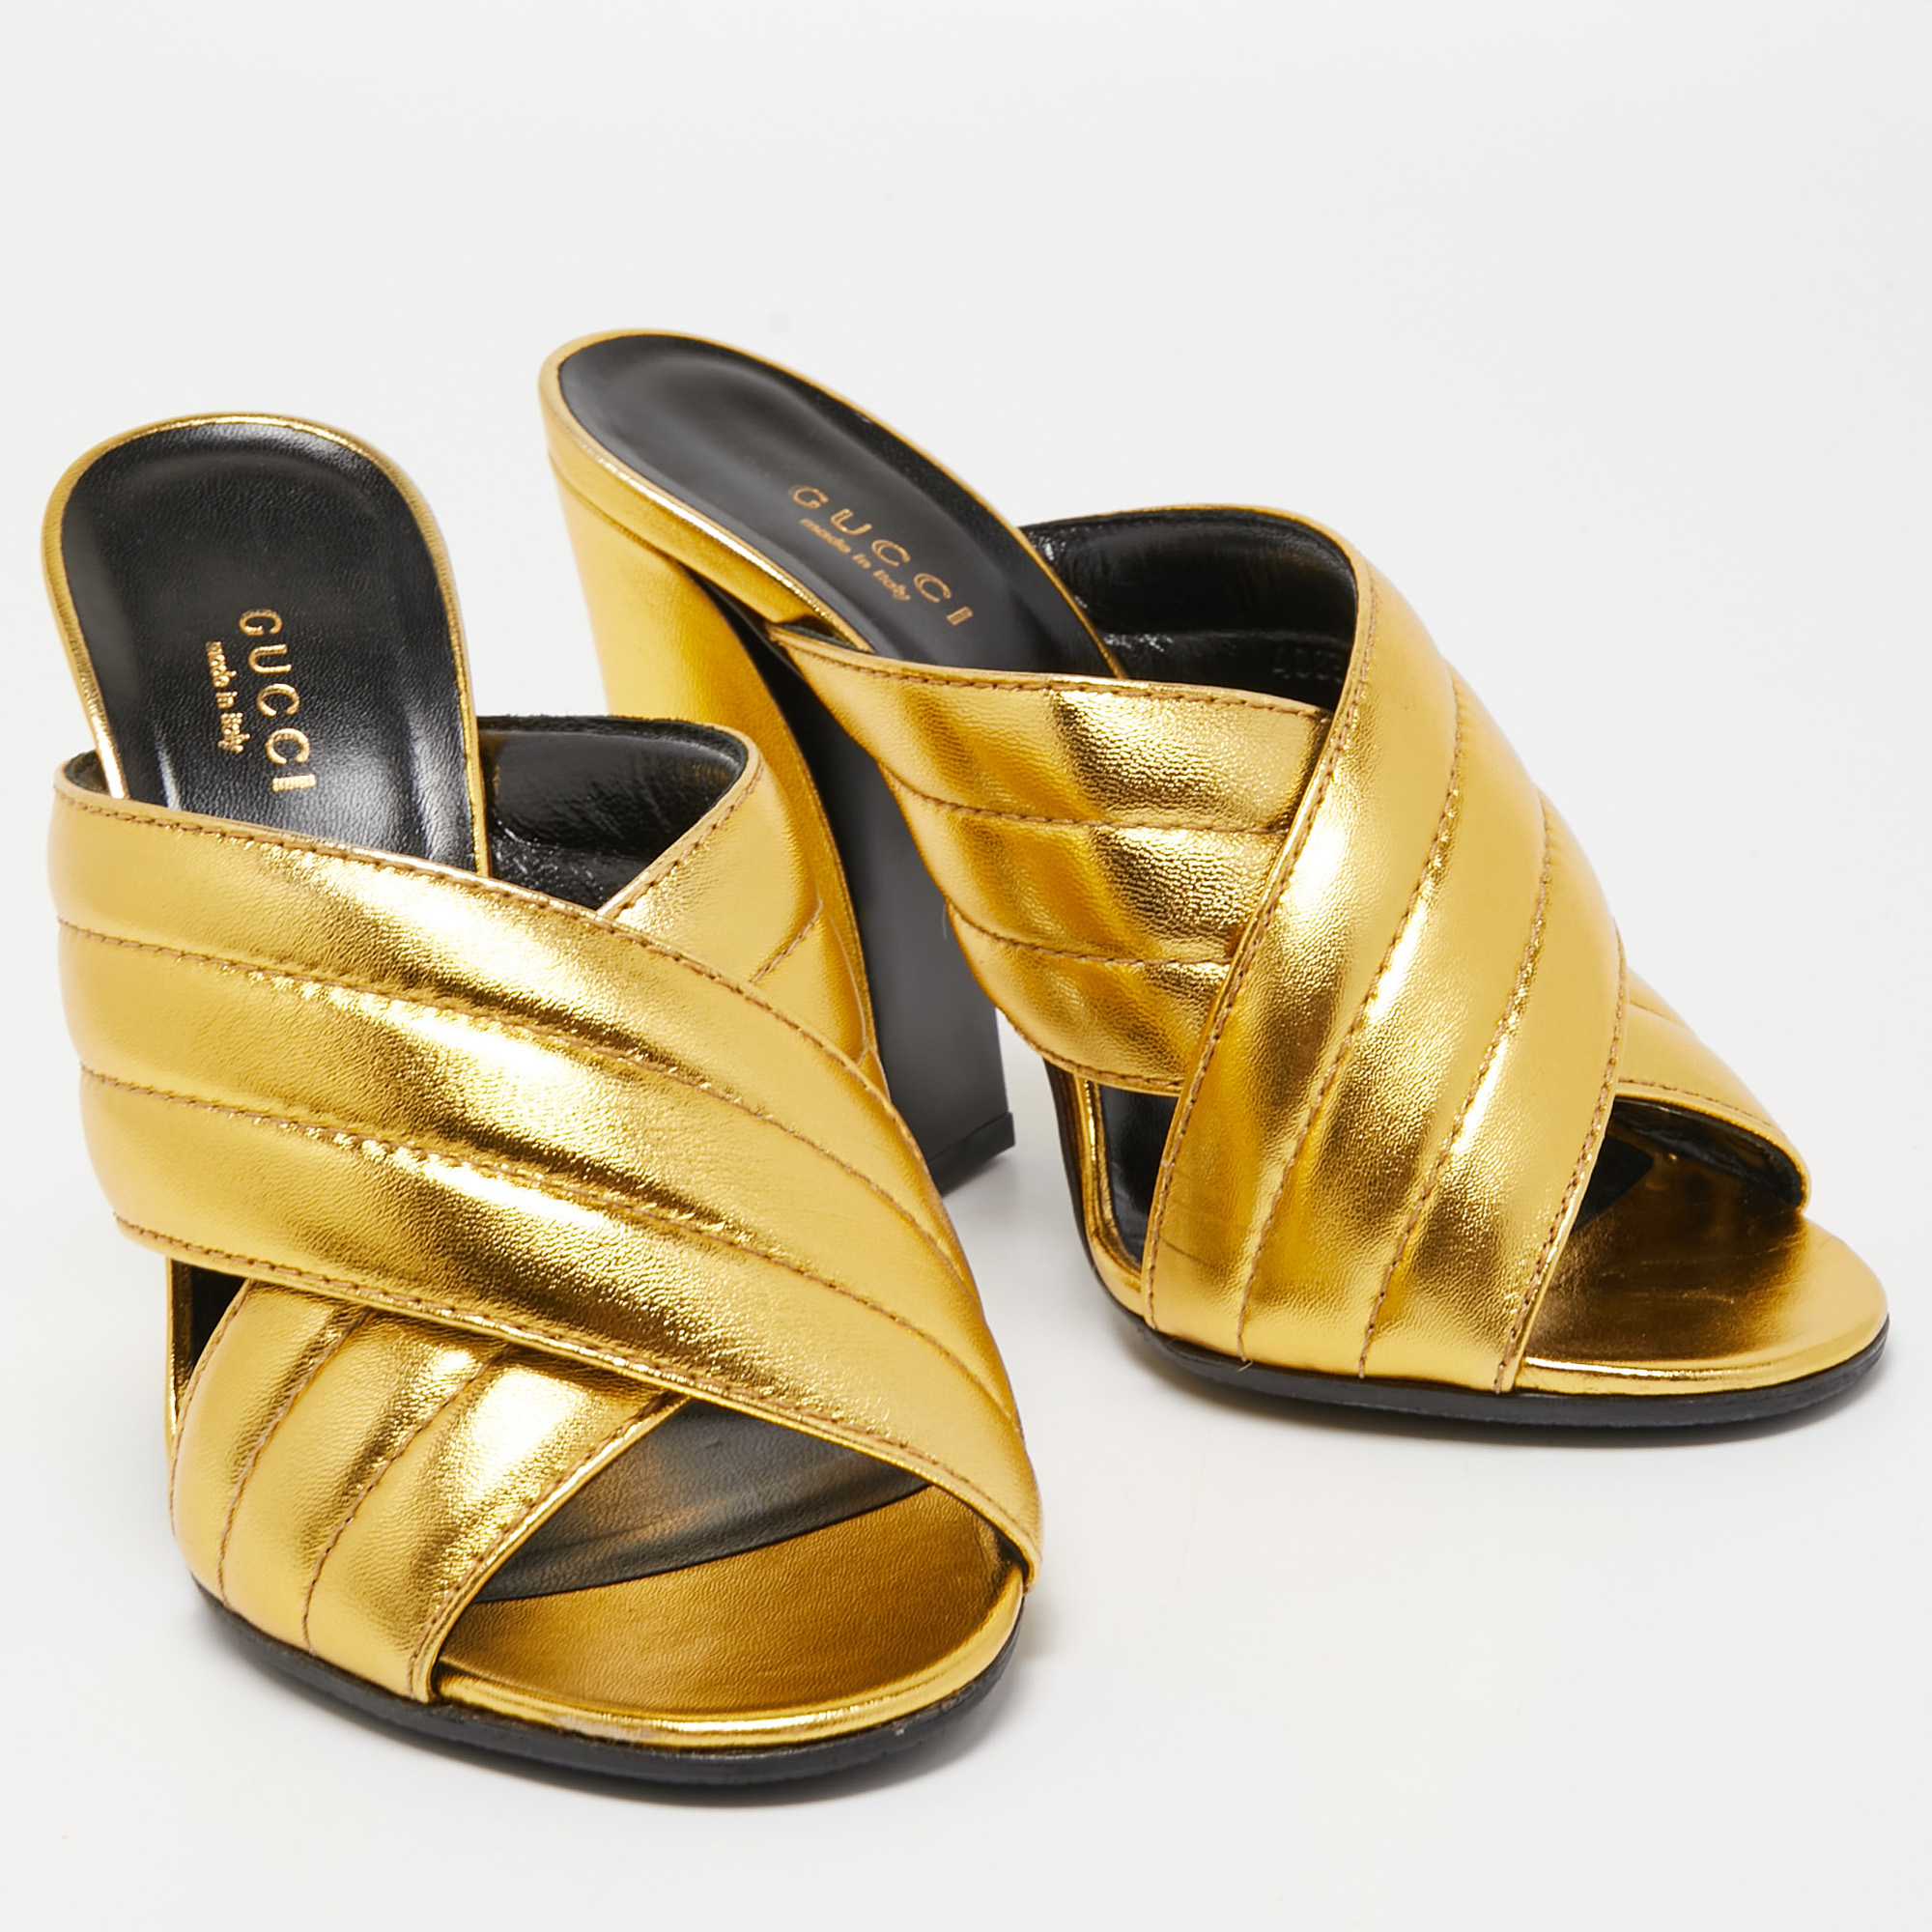 Gucci Gold Leather Webby Cross Strap Slide Sandals Size 37.5